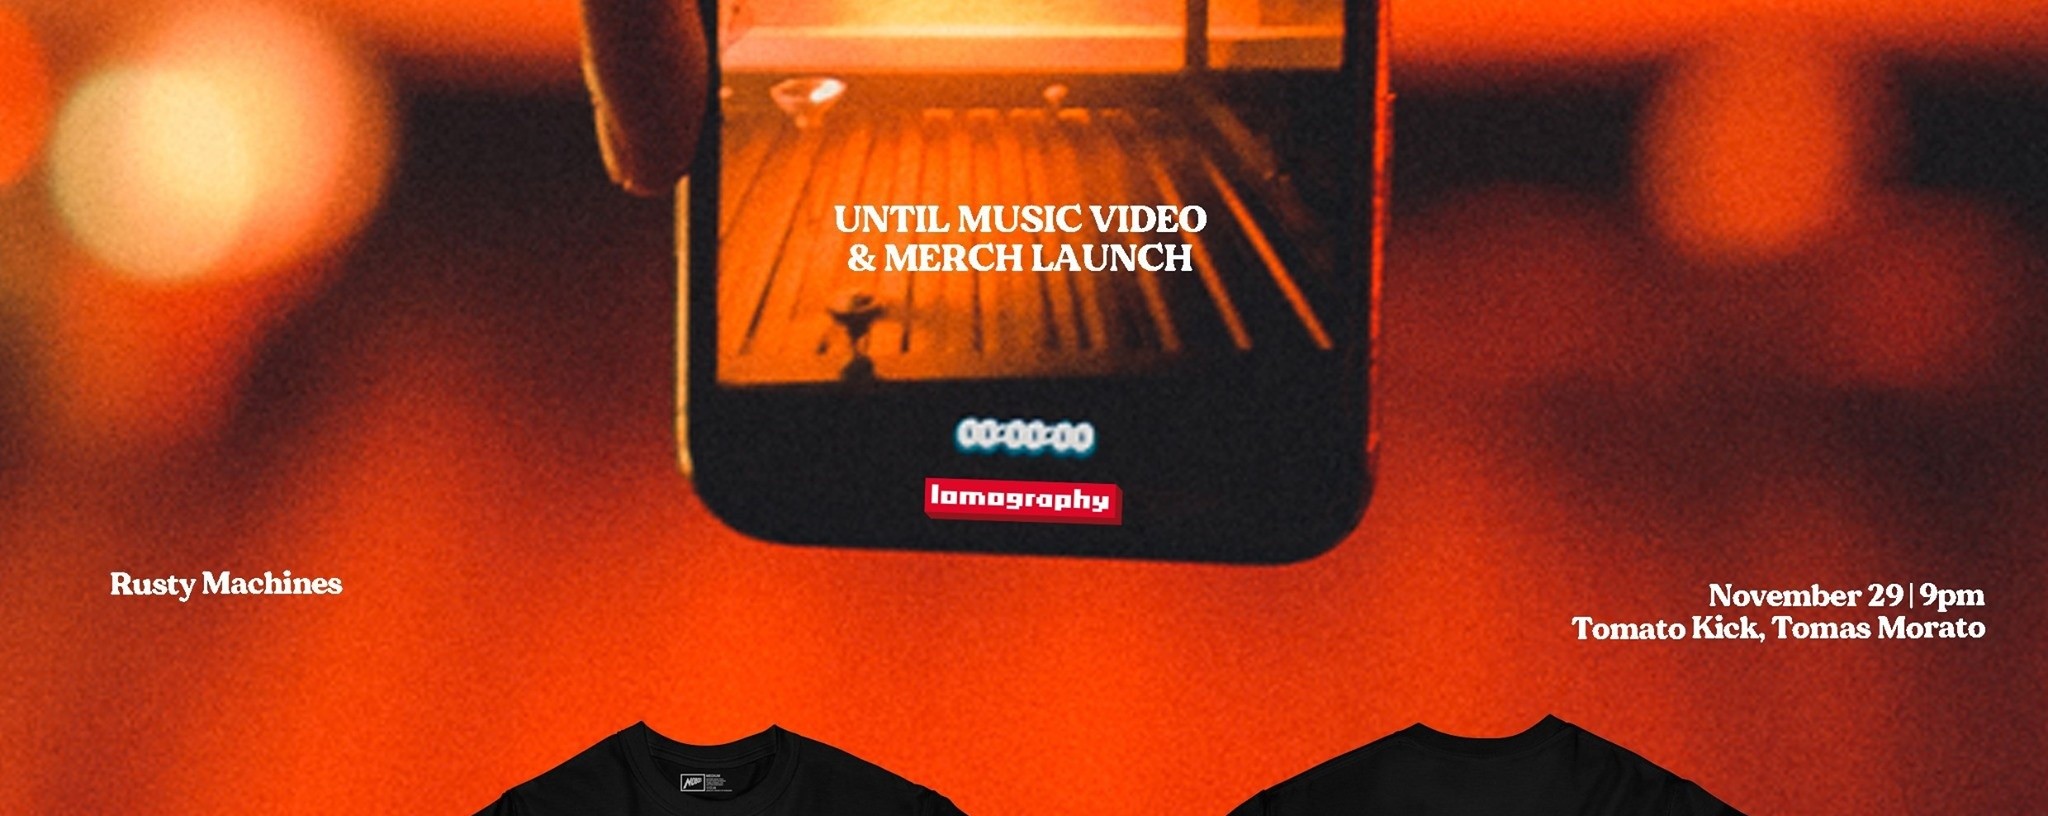 Rusty Machines' UNTIL Music Video and Merch Launch